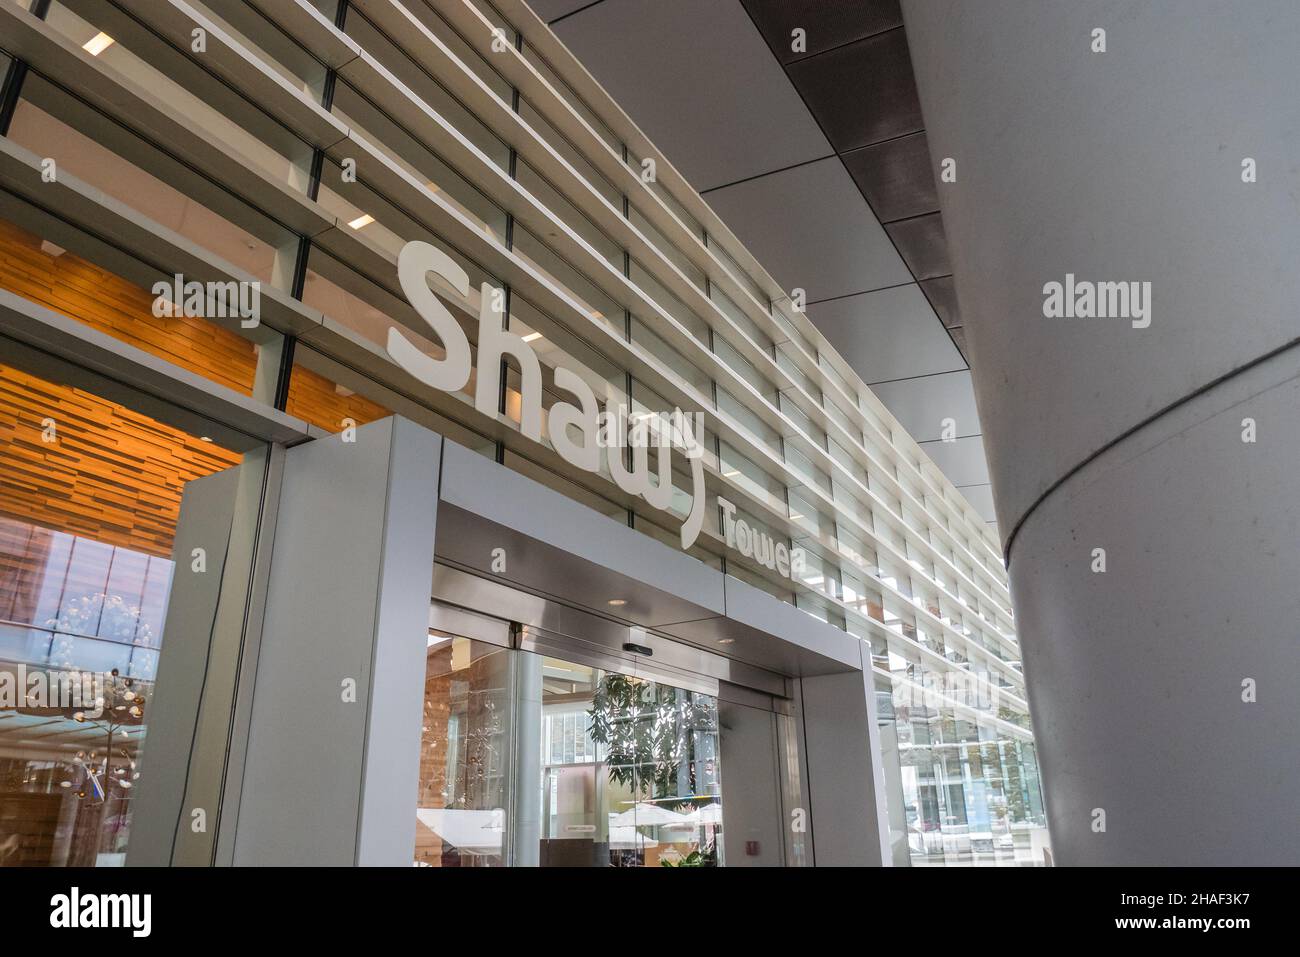 Shaw Tower, located at 1067 W. Cordova St in Downtown Vancouver's Coal Harbour, in British Columbia, Canada, is home to Shaw Communications' headquart Stock Photo